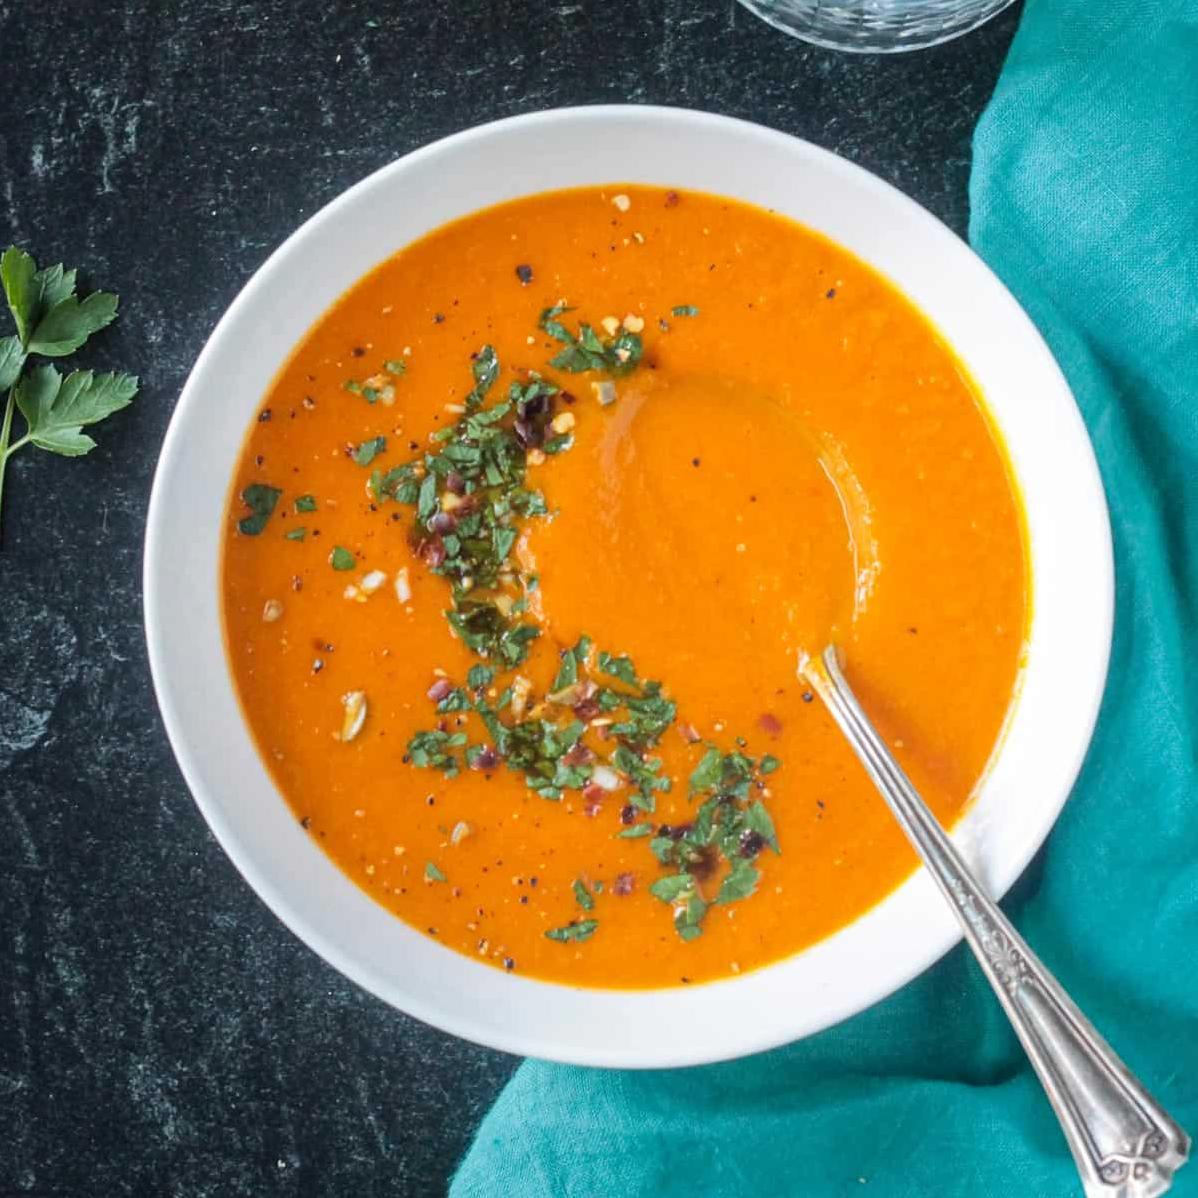  This soup is a perfect way to sneak some extra veggies into your diet!